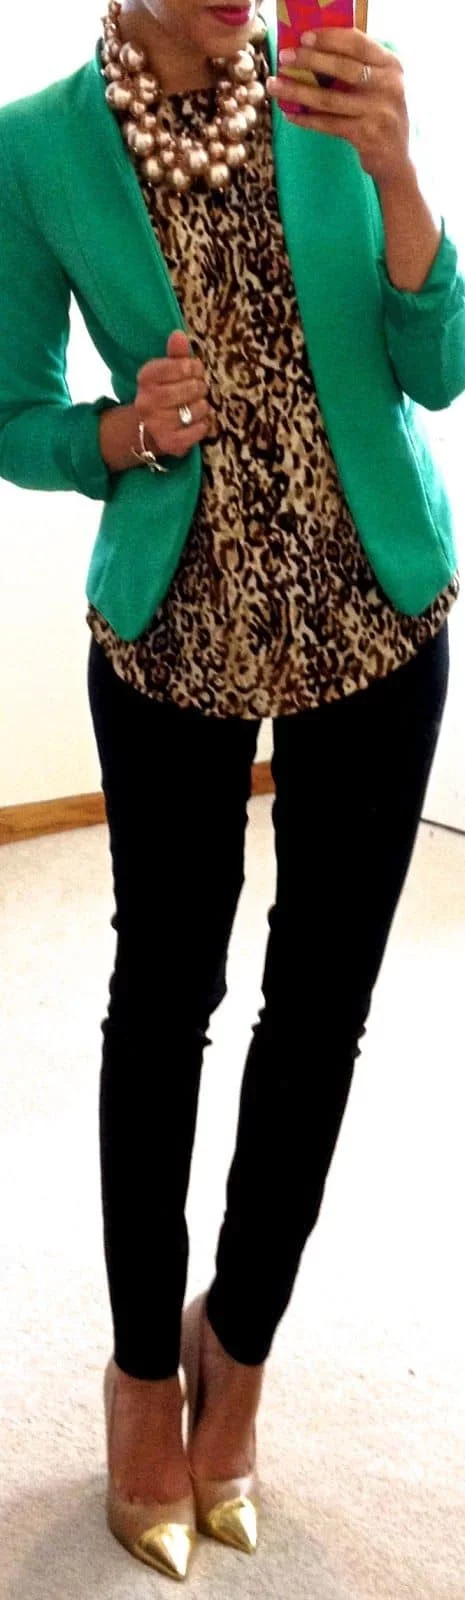 outfit with cheetah printed shirt